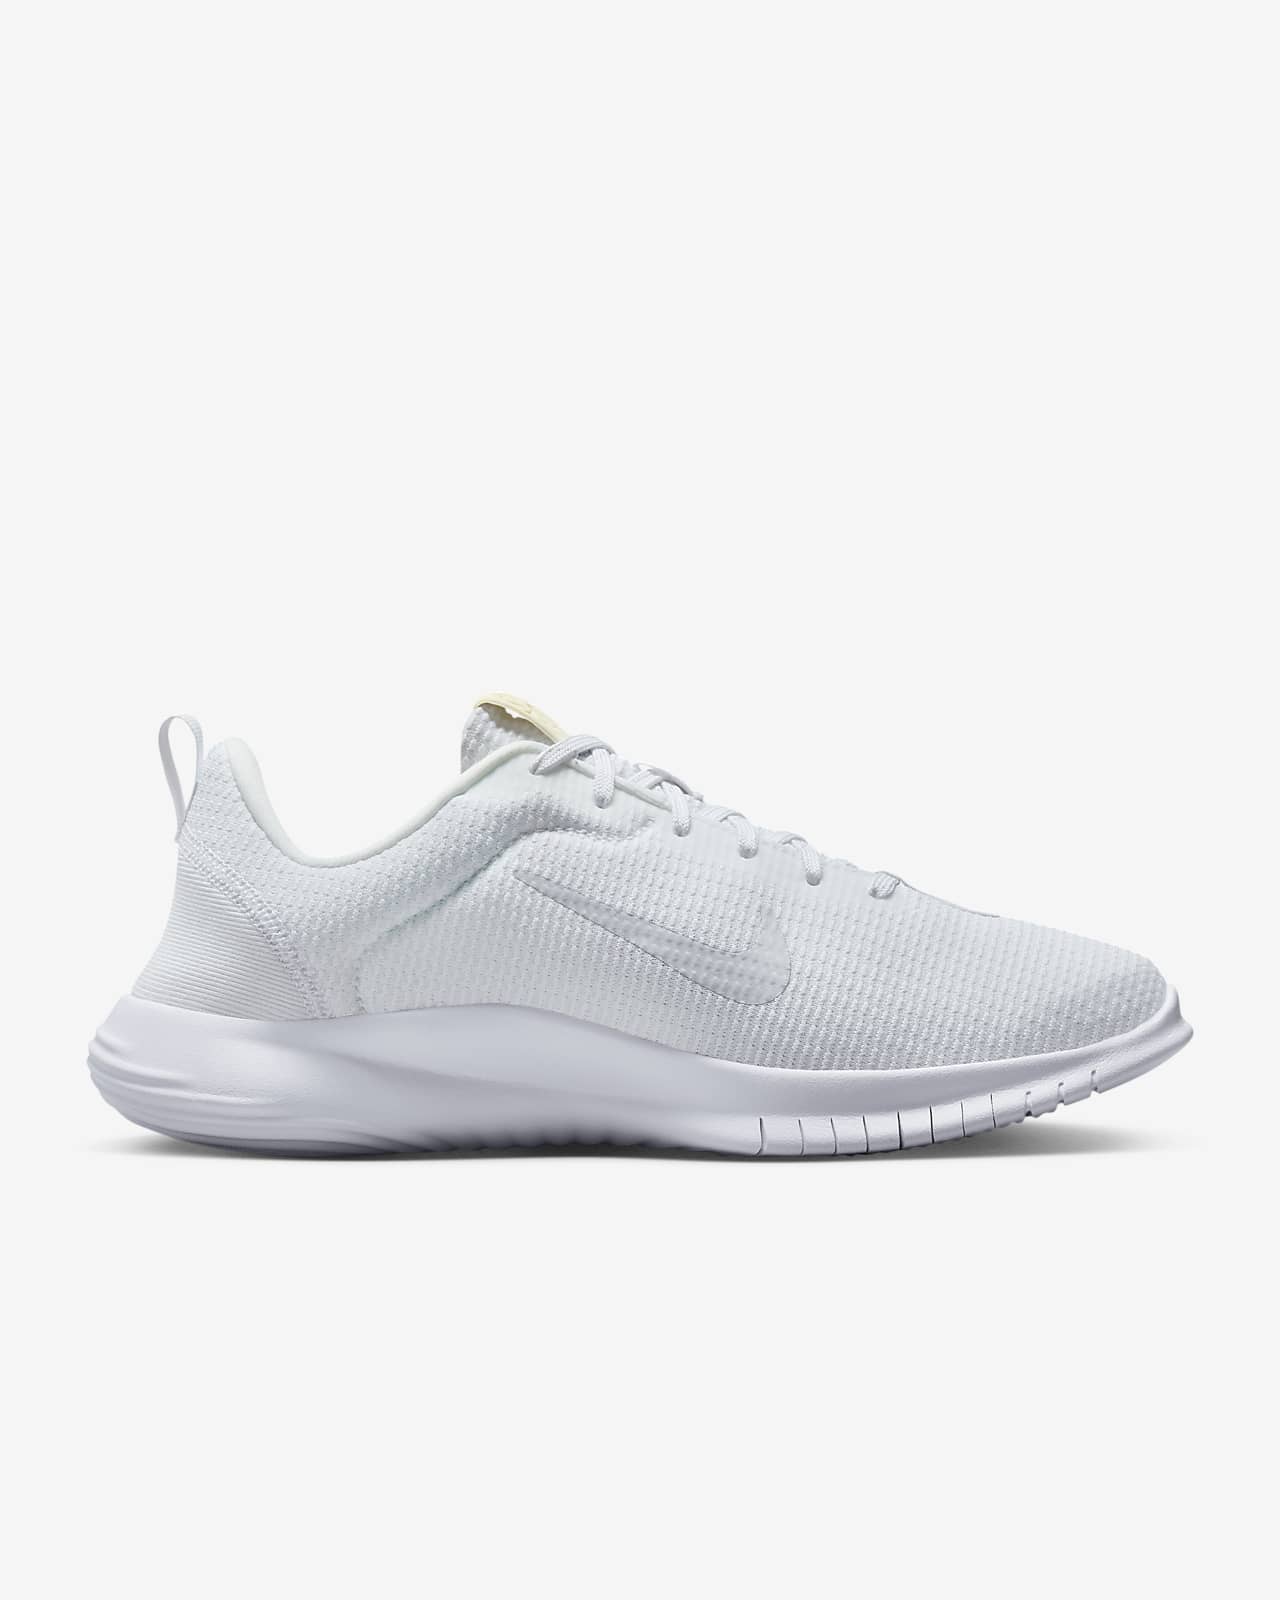 Nike Flex Experience RN 5 Athletic Shoes for Women